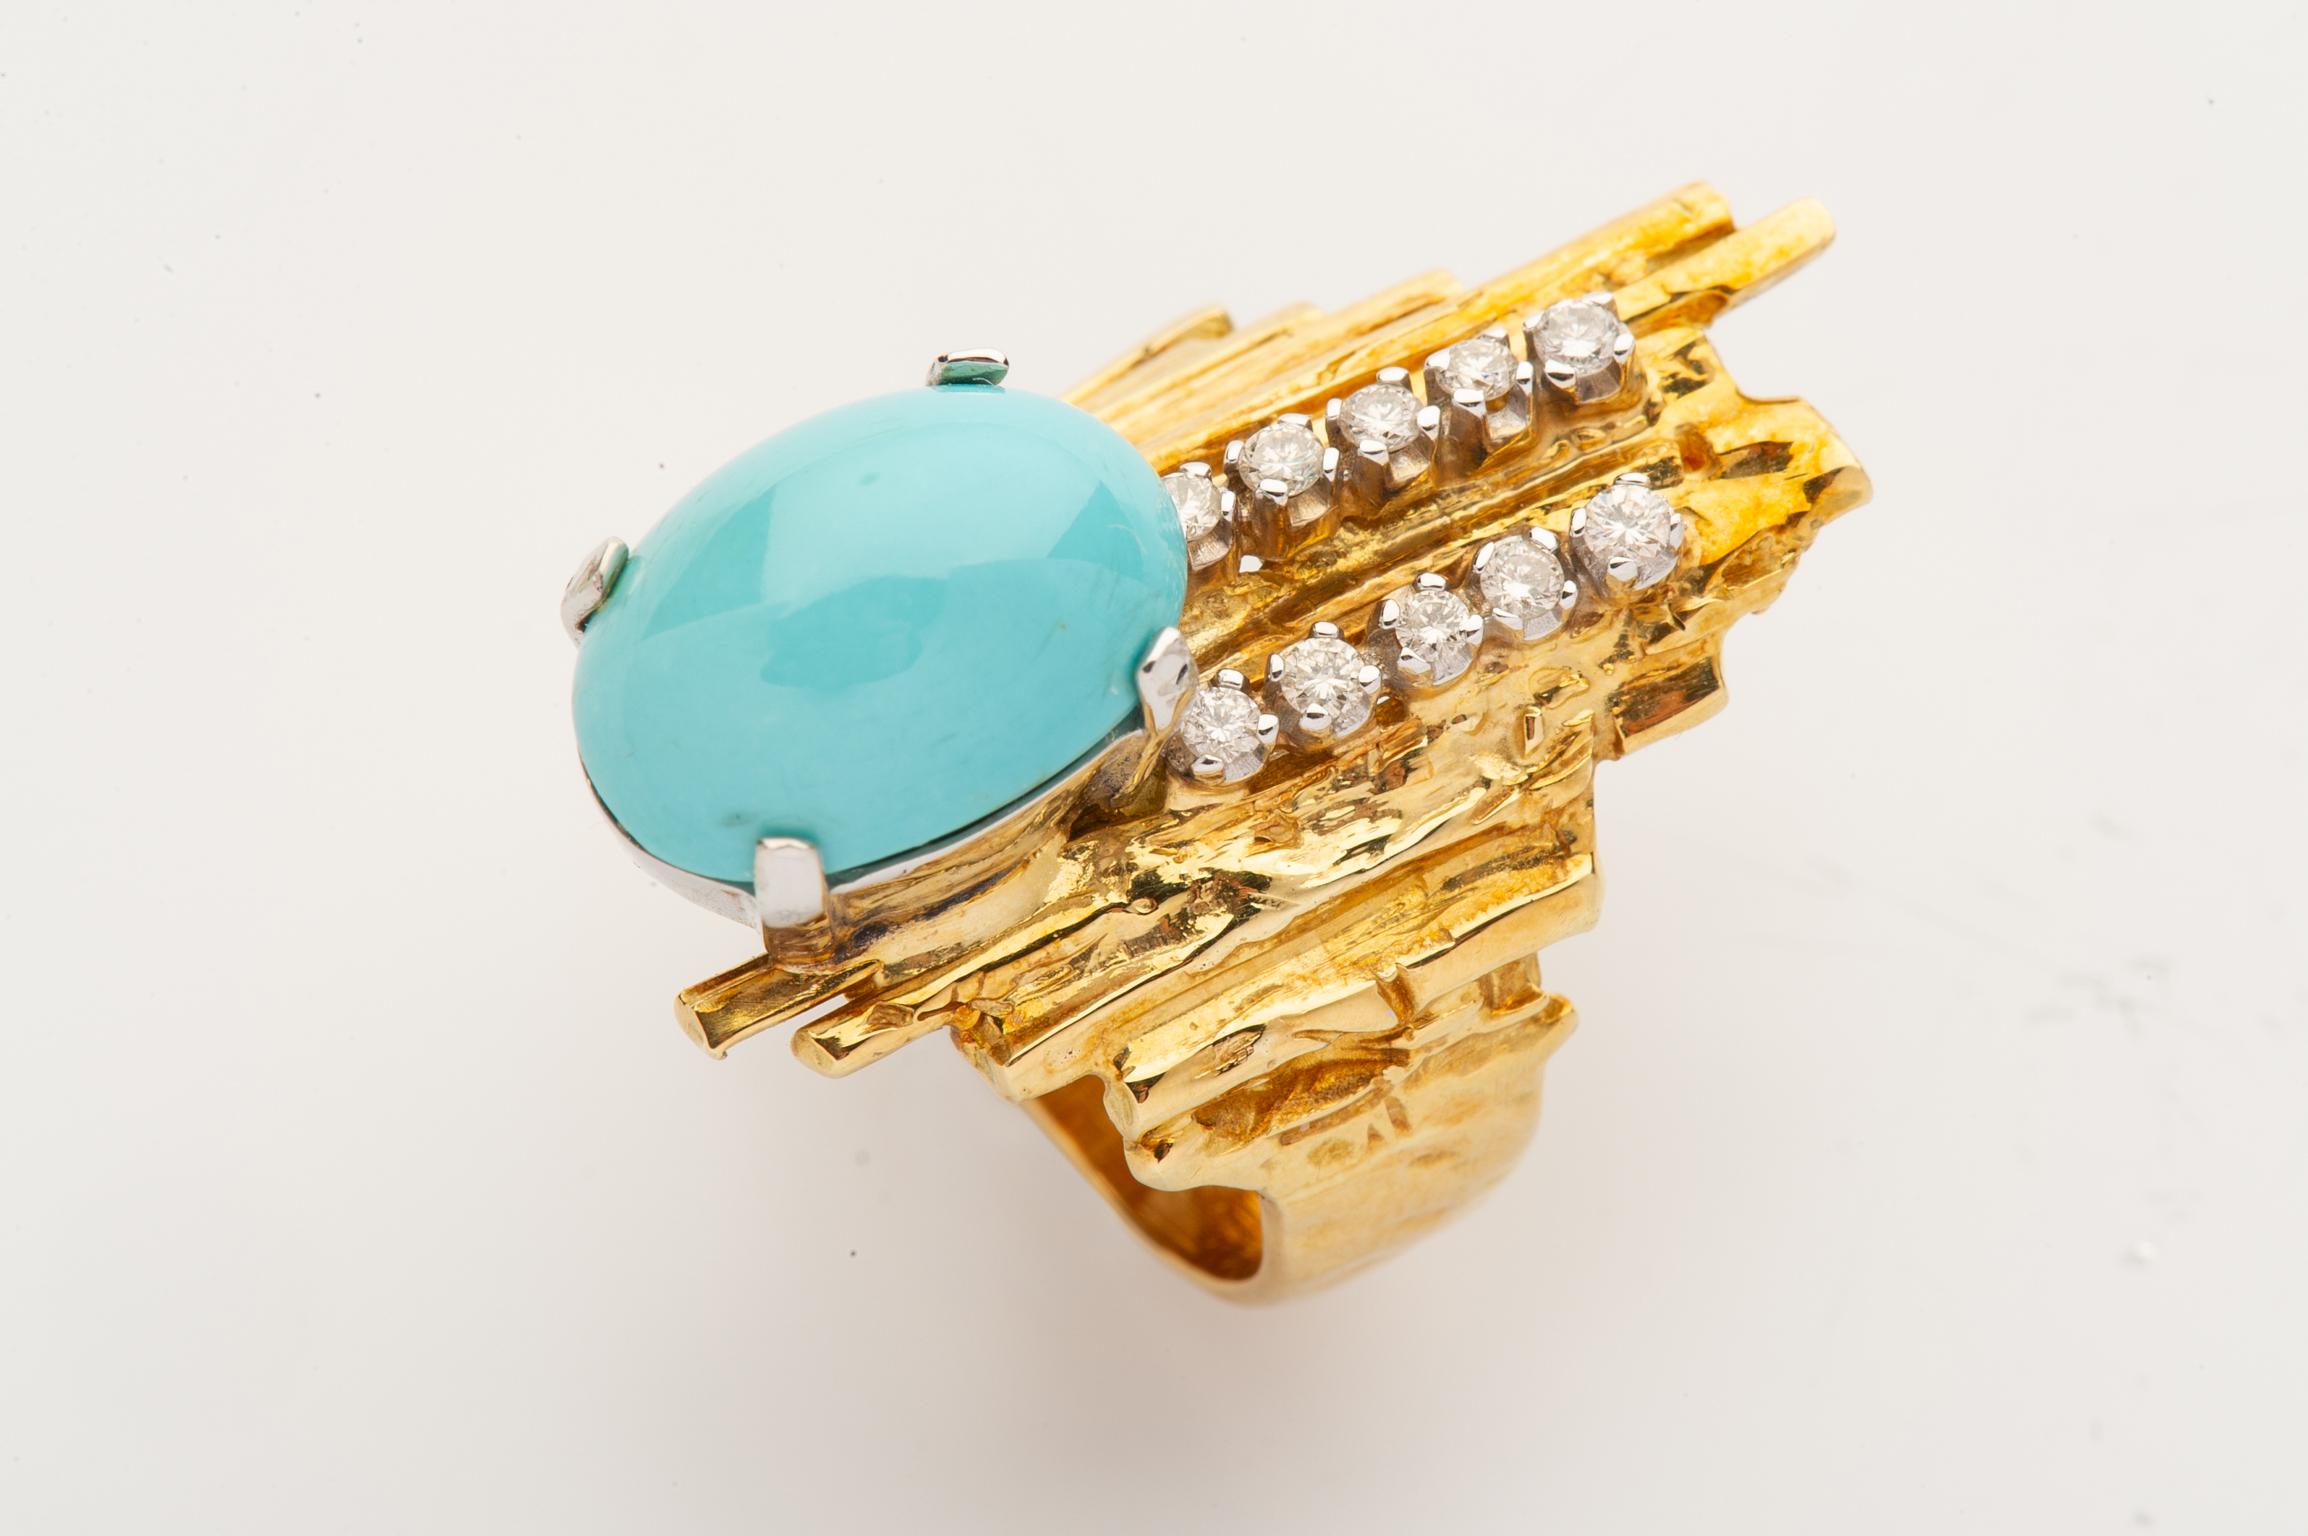 Italian cocktail ring in yellow gold, turquoise cabochon and diamonds - signed Nene Antonione designer -
turquoise: cm. 13x 9 x H.6 cm -
Unique piece made for an Italian lady.
   